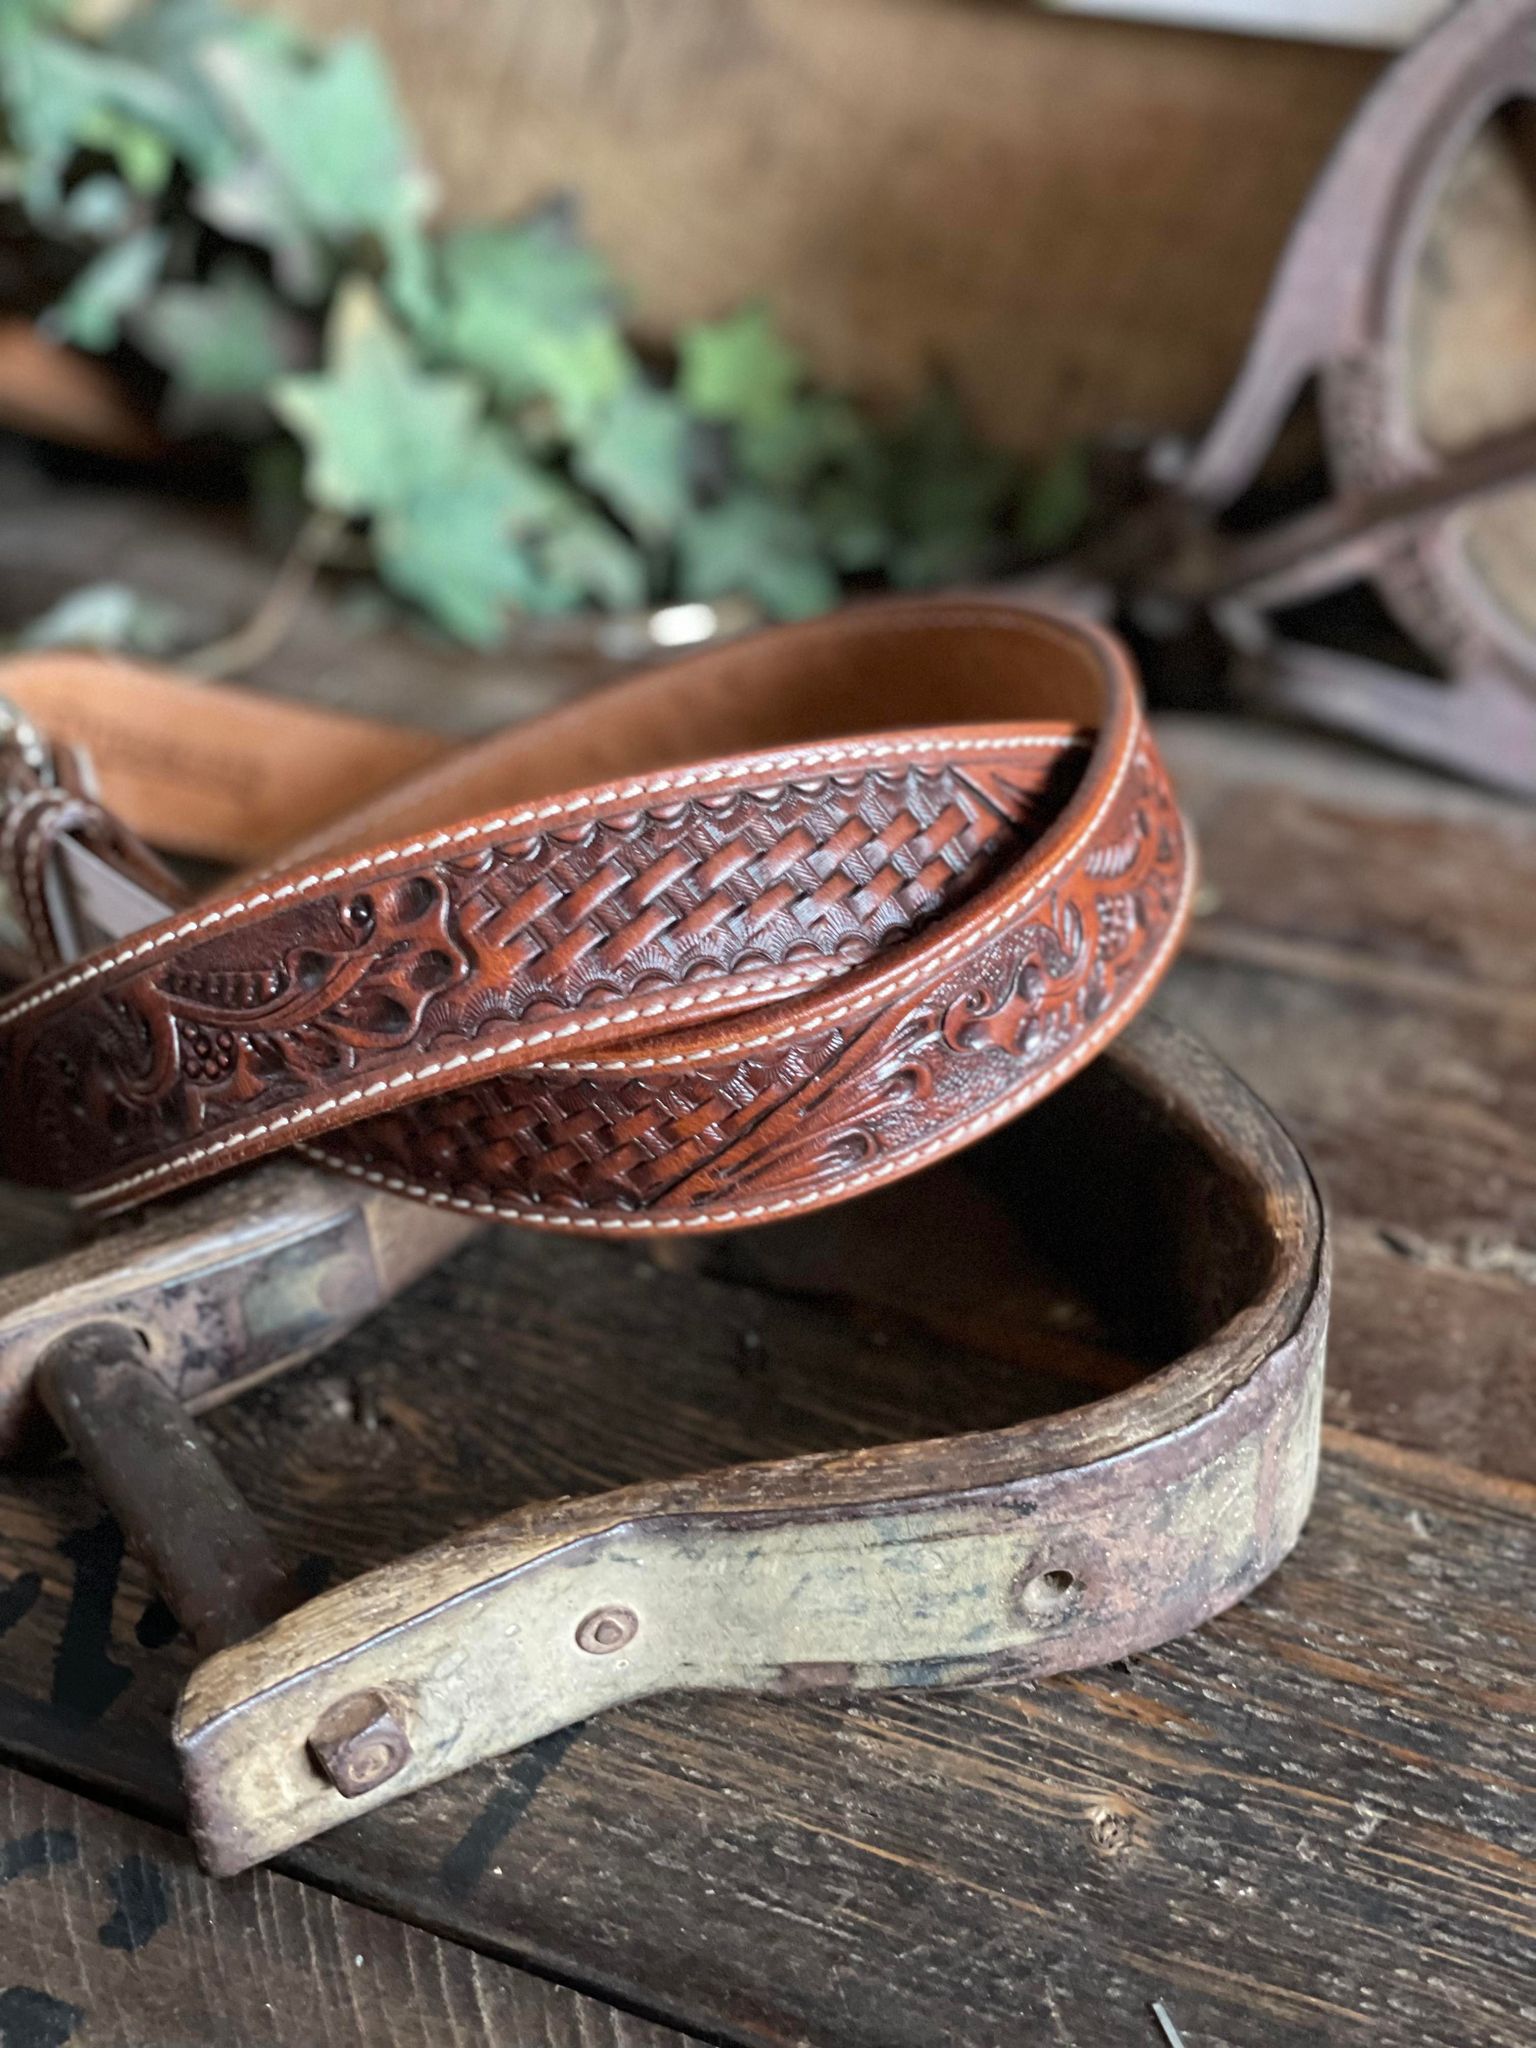 XB-100 Twisted X Chestnut Basket Floral Weave Belt-Women's Belts-WESTERN FASHION ACCESSORIES-Lucky J Boots & More, Women's, Men's, & Kids Western Store Located in Carthage, MO